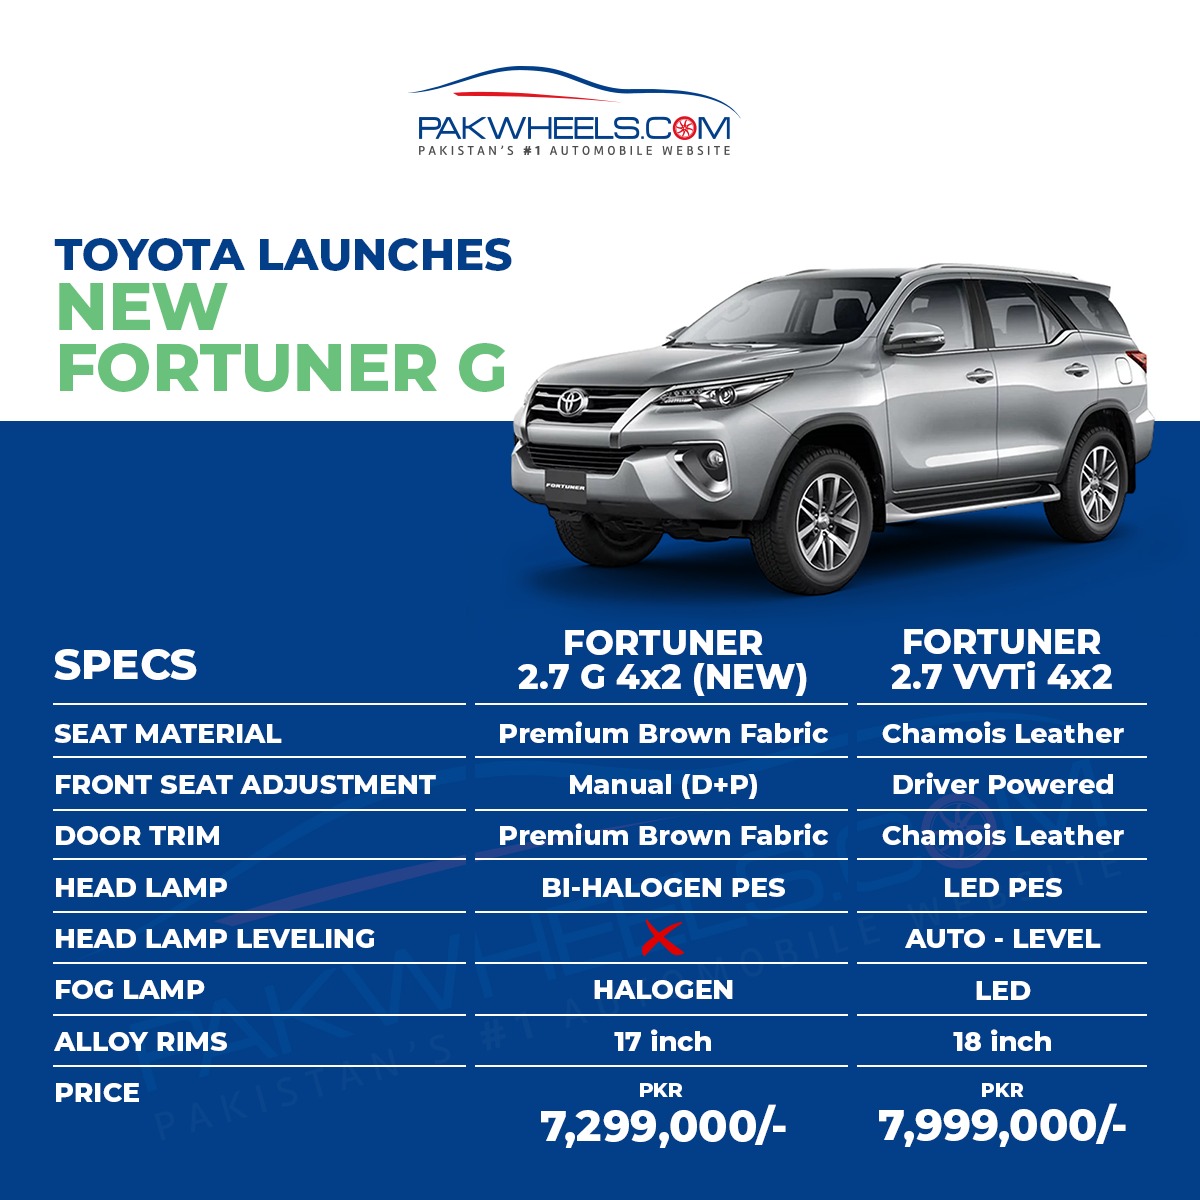 Toyota Indus launches a new variant of Fortuner- Fortuner G | PakWheels